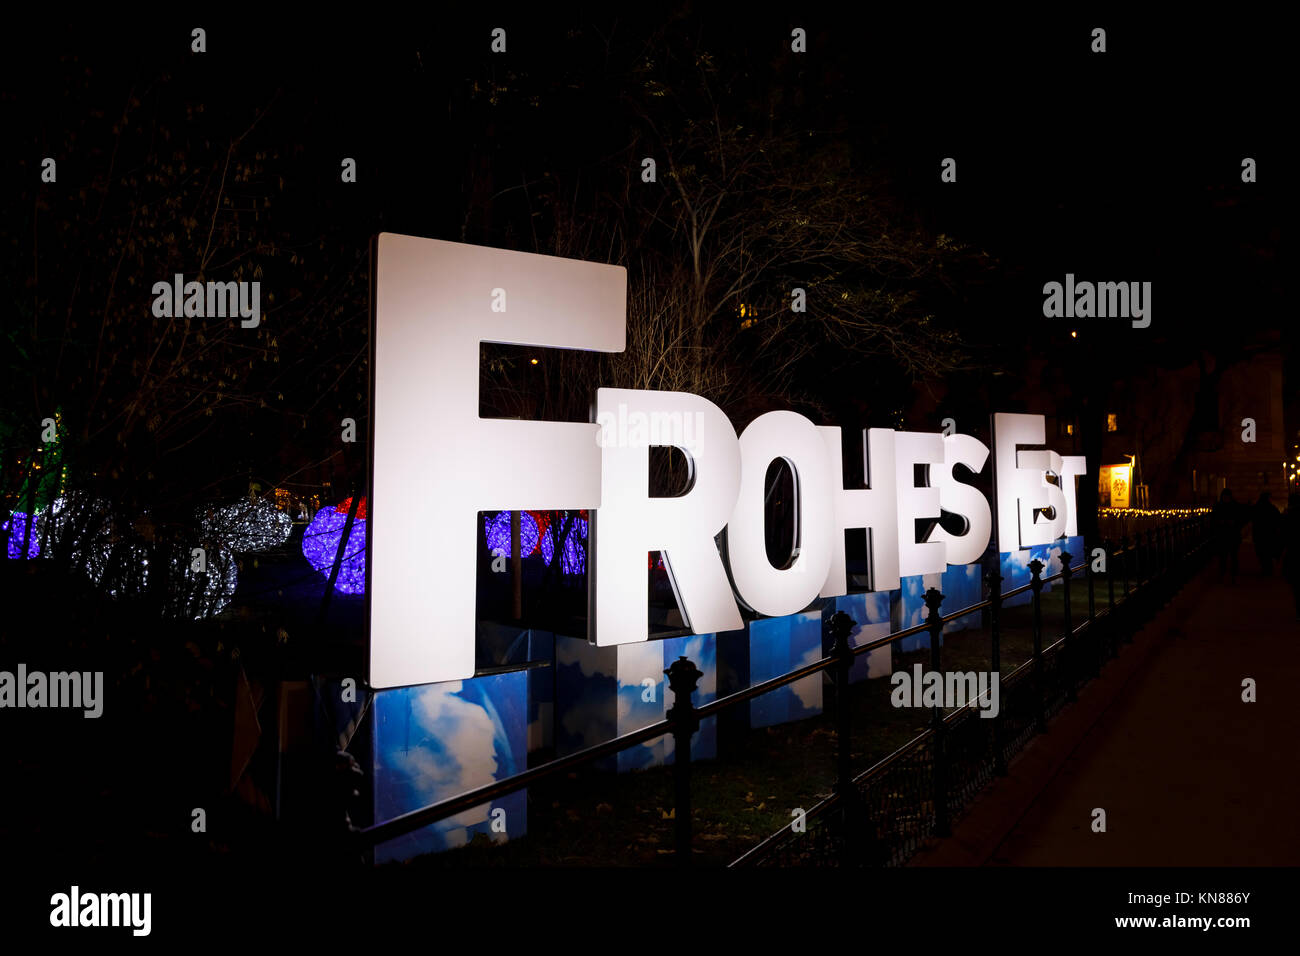 Vienna, Austria, 10th December 2017. Illuminated Frohes Fest sign at the traditional festive season Viennese Christmas Market in Rathausplatz (Christkindlmarkt am Rathausplatz, Wiener Christkindlmarkt), the largest yuletide market in Vienna, situated by the Neues Rathaus (new city hall) in the Museum Quarter of central Vienna (Innere Stadt). Credit: Graham Prentice/Alamy Live News. Stock Photo